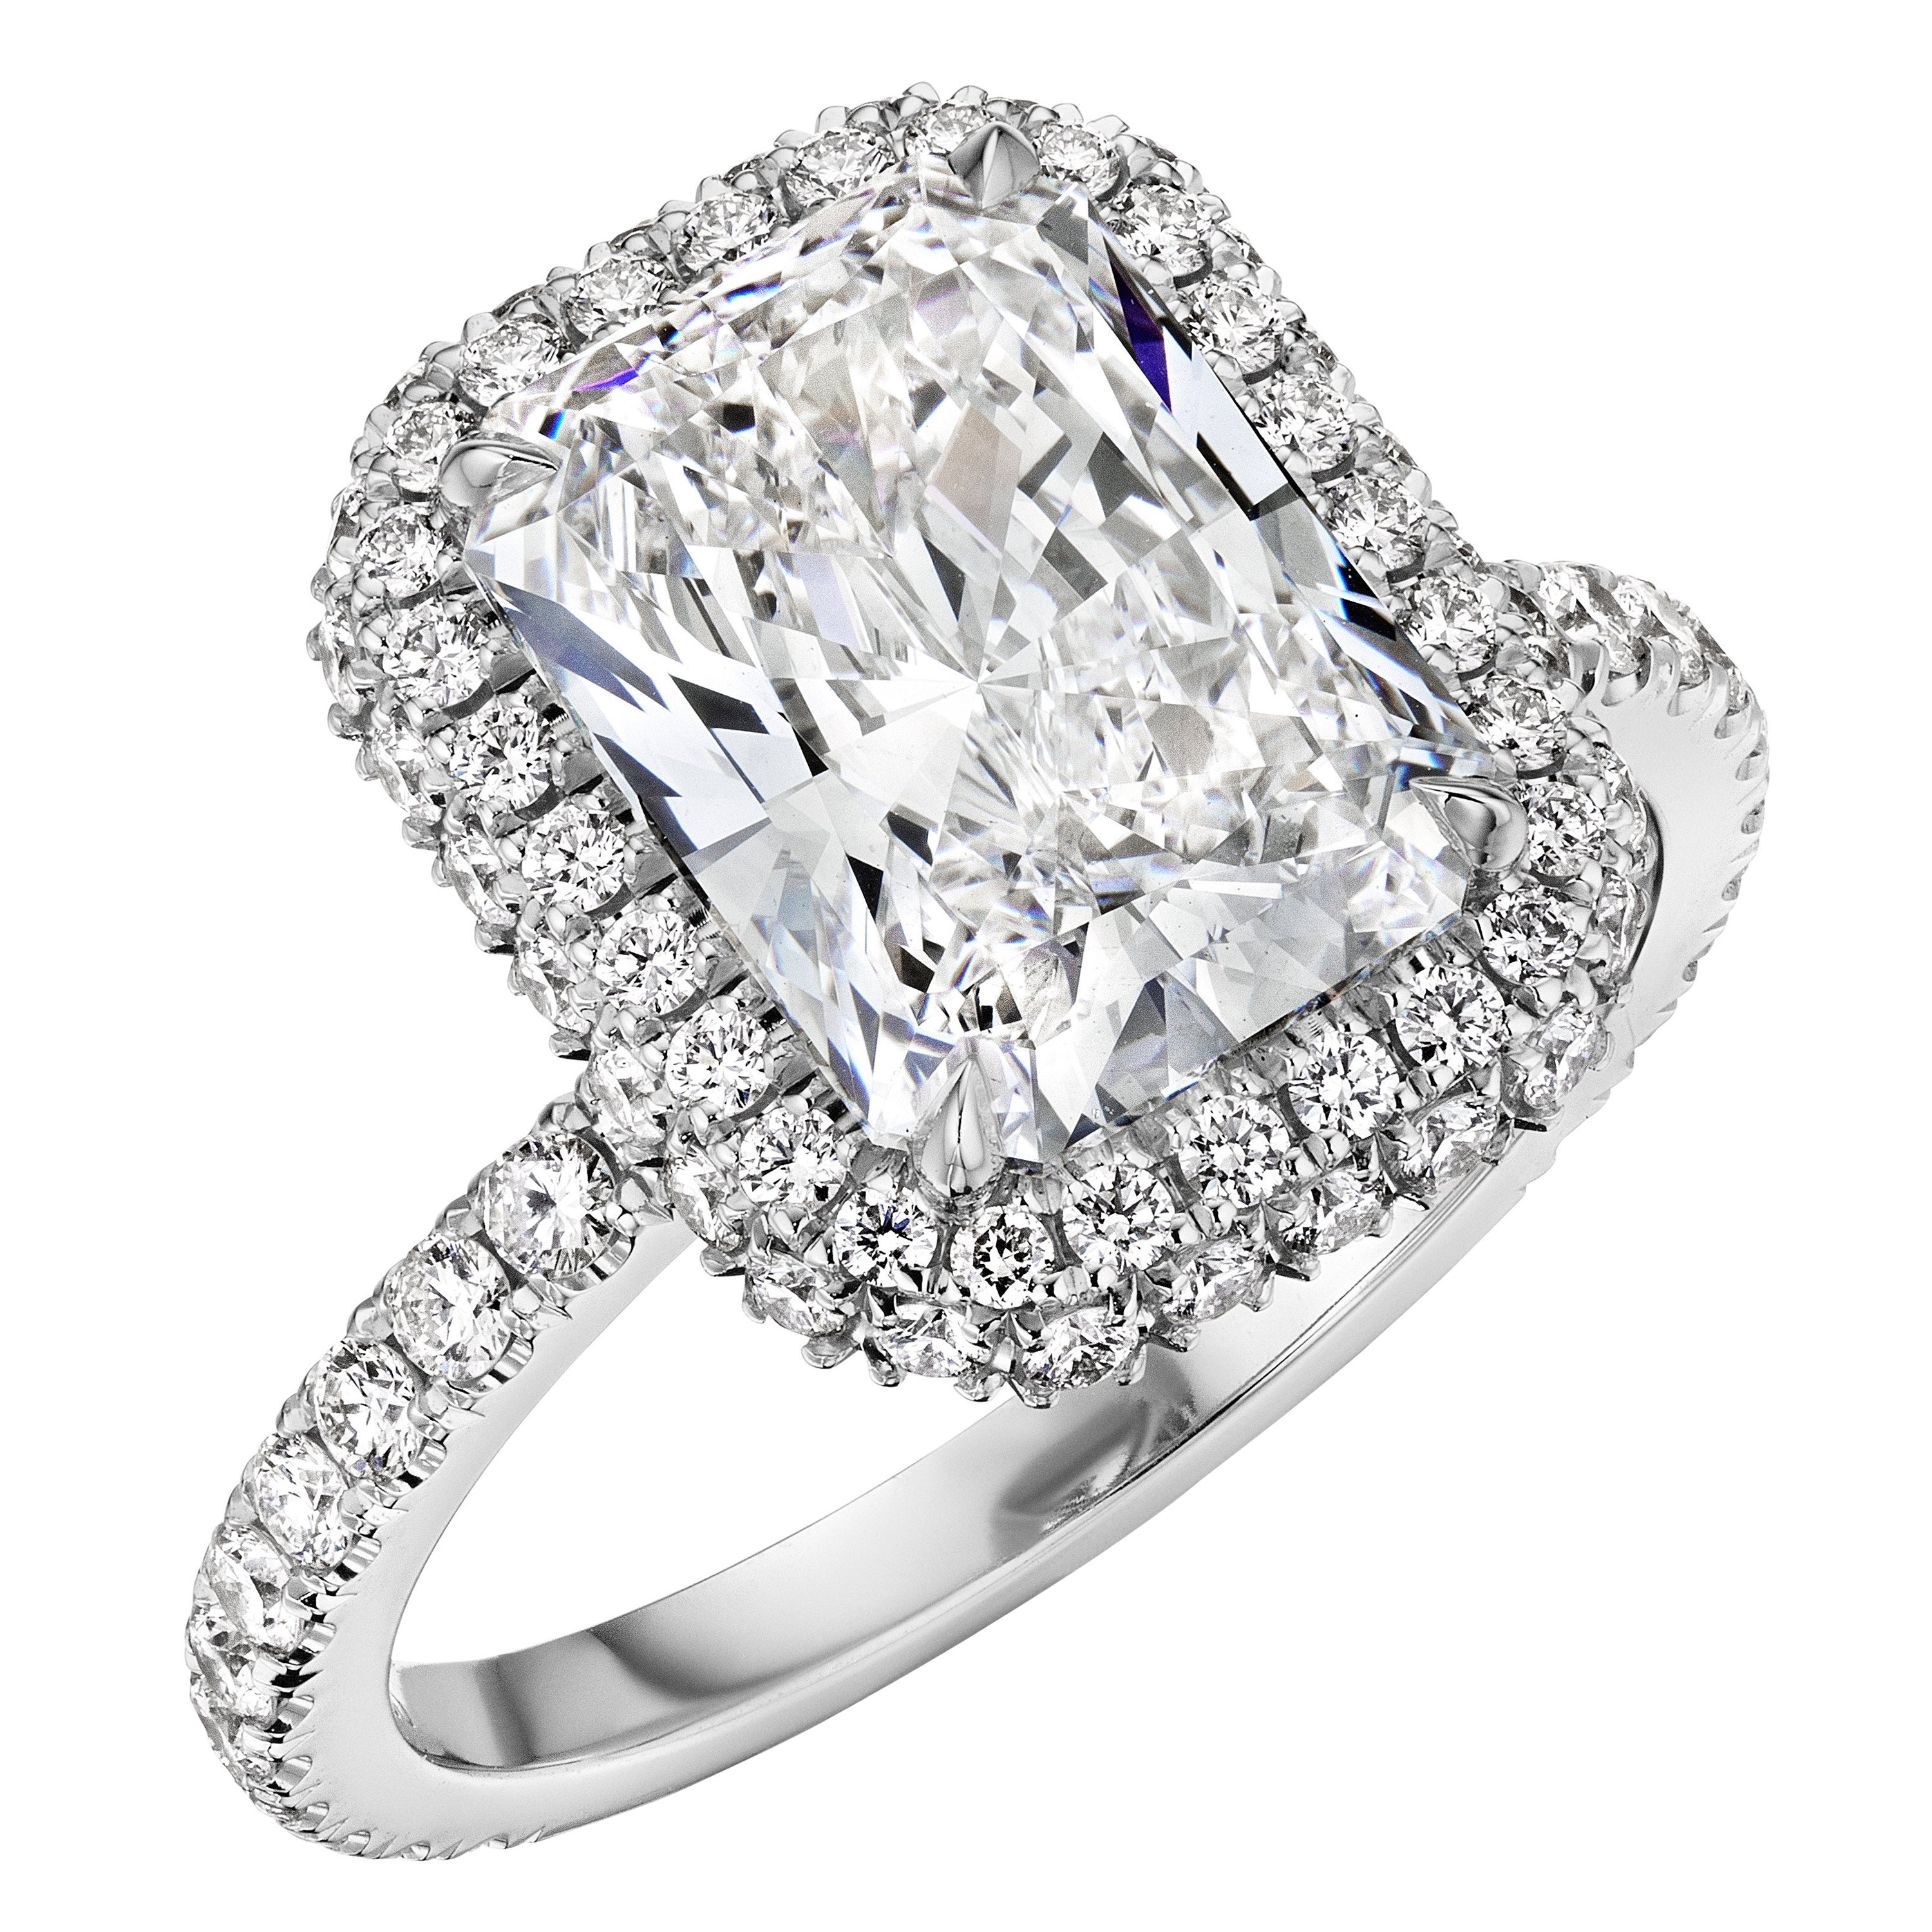 GIA Certified 2.75 Carat E VS1 Radiant Diamond Engagement Ring "Camila" For Sale